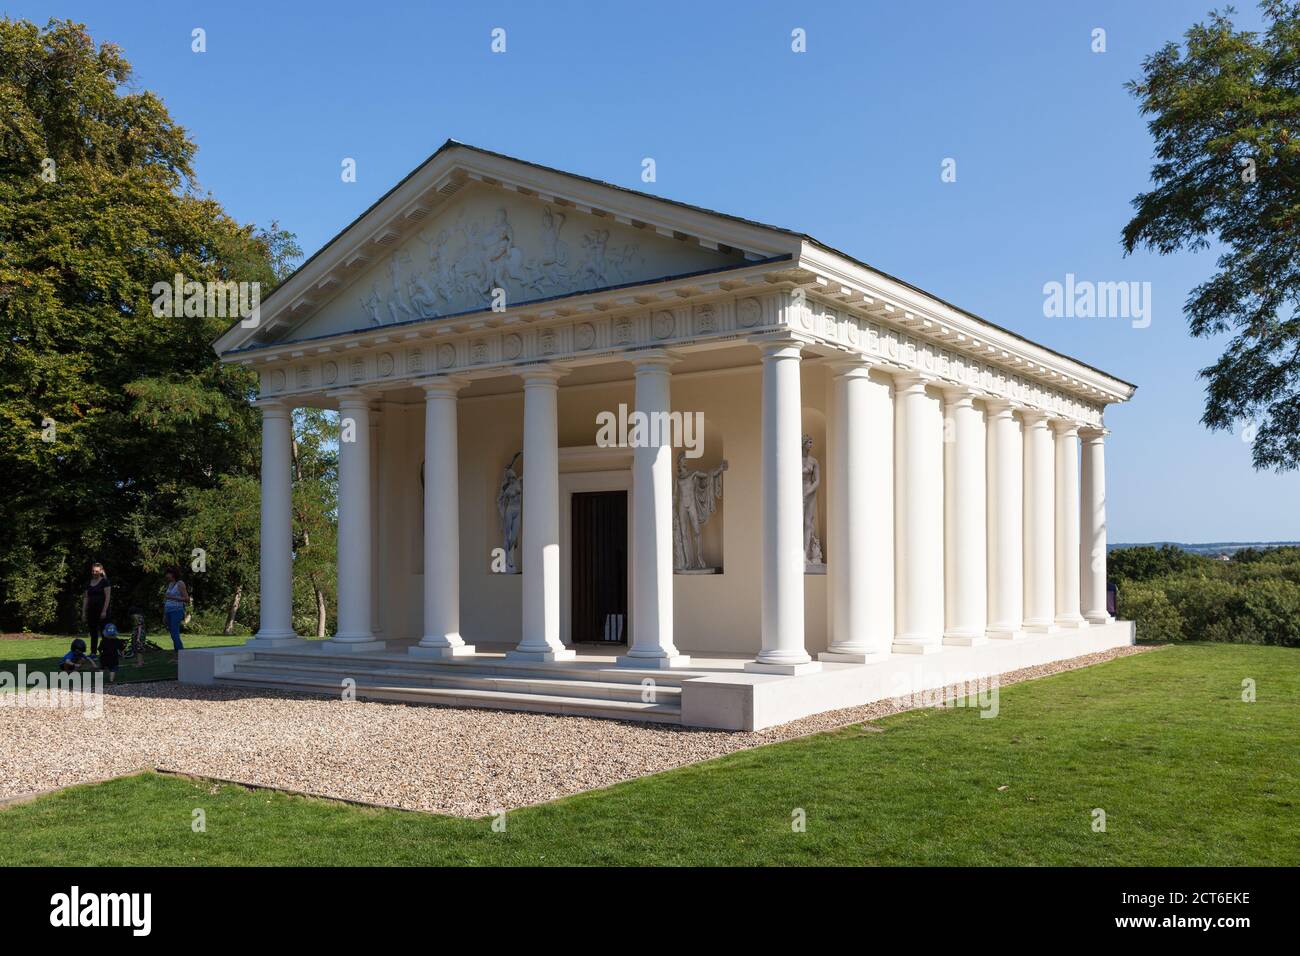 The Temple of Bacchus at Painshill Park, an 18th century English landscape garden in Surrey. Stock Photo